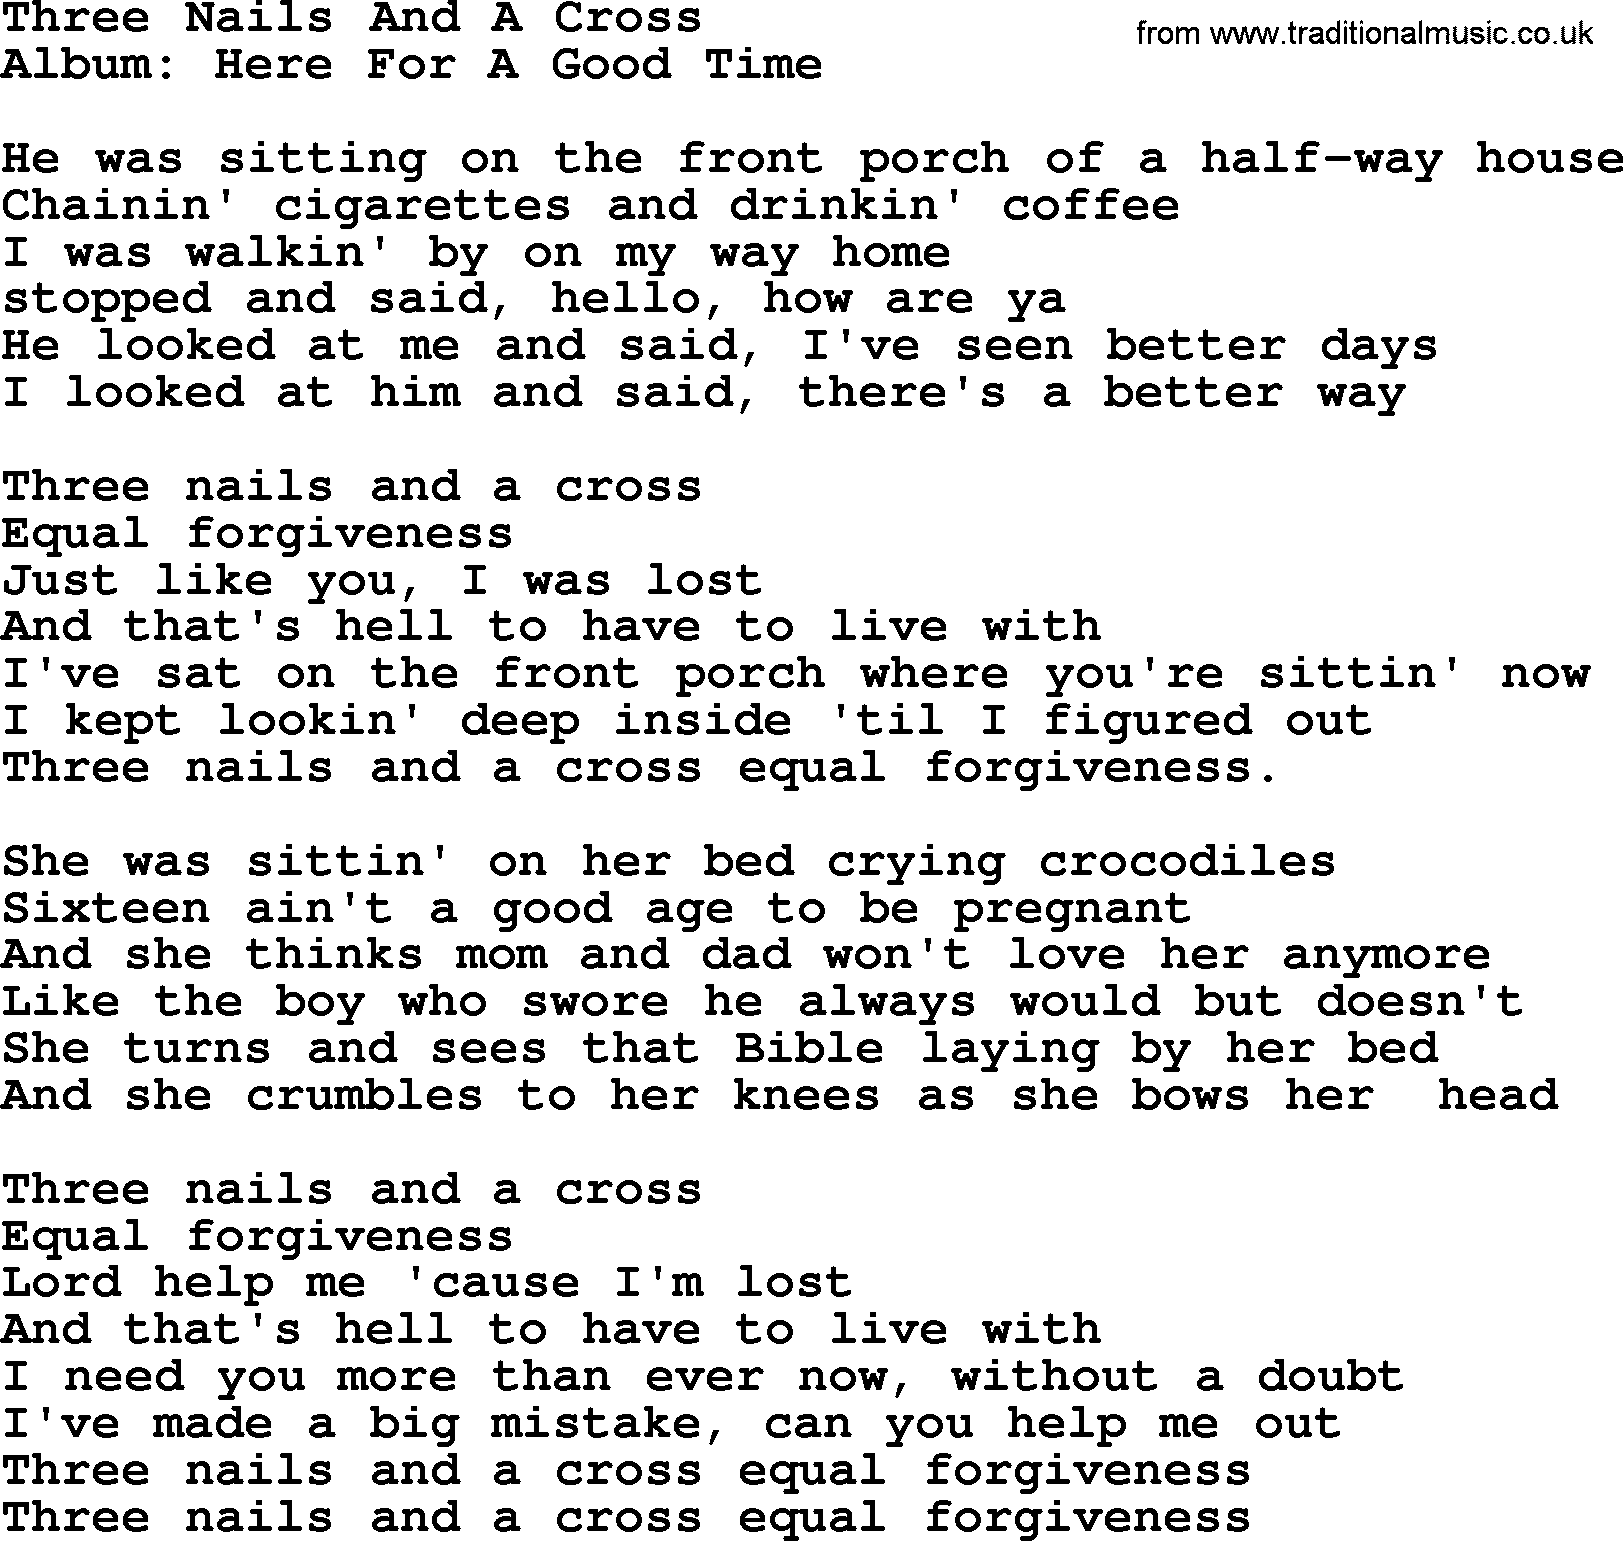 George Strait song: Three Nails And A Cross, lyrics